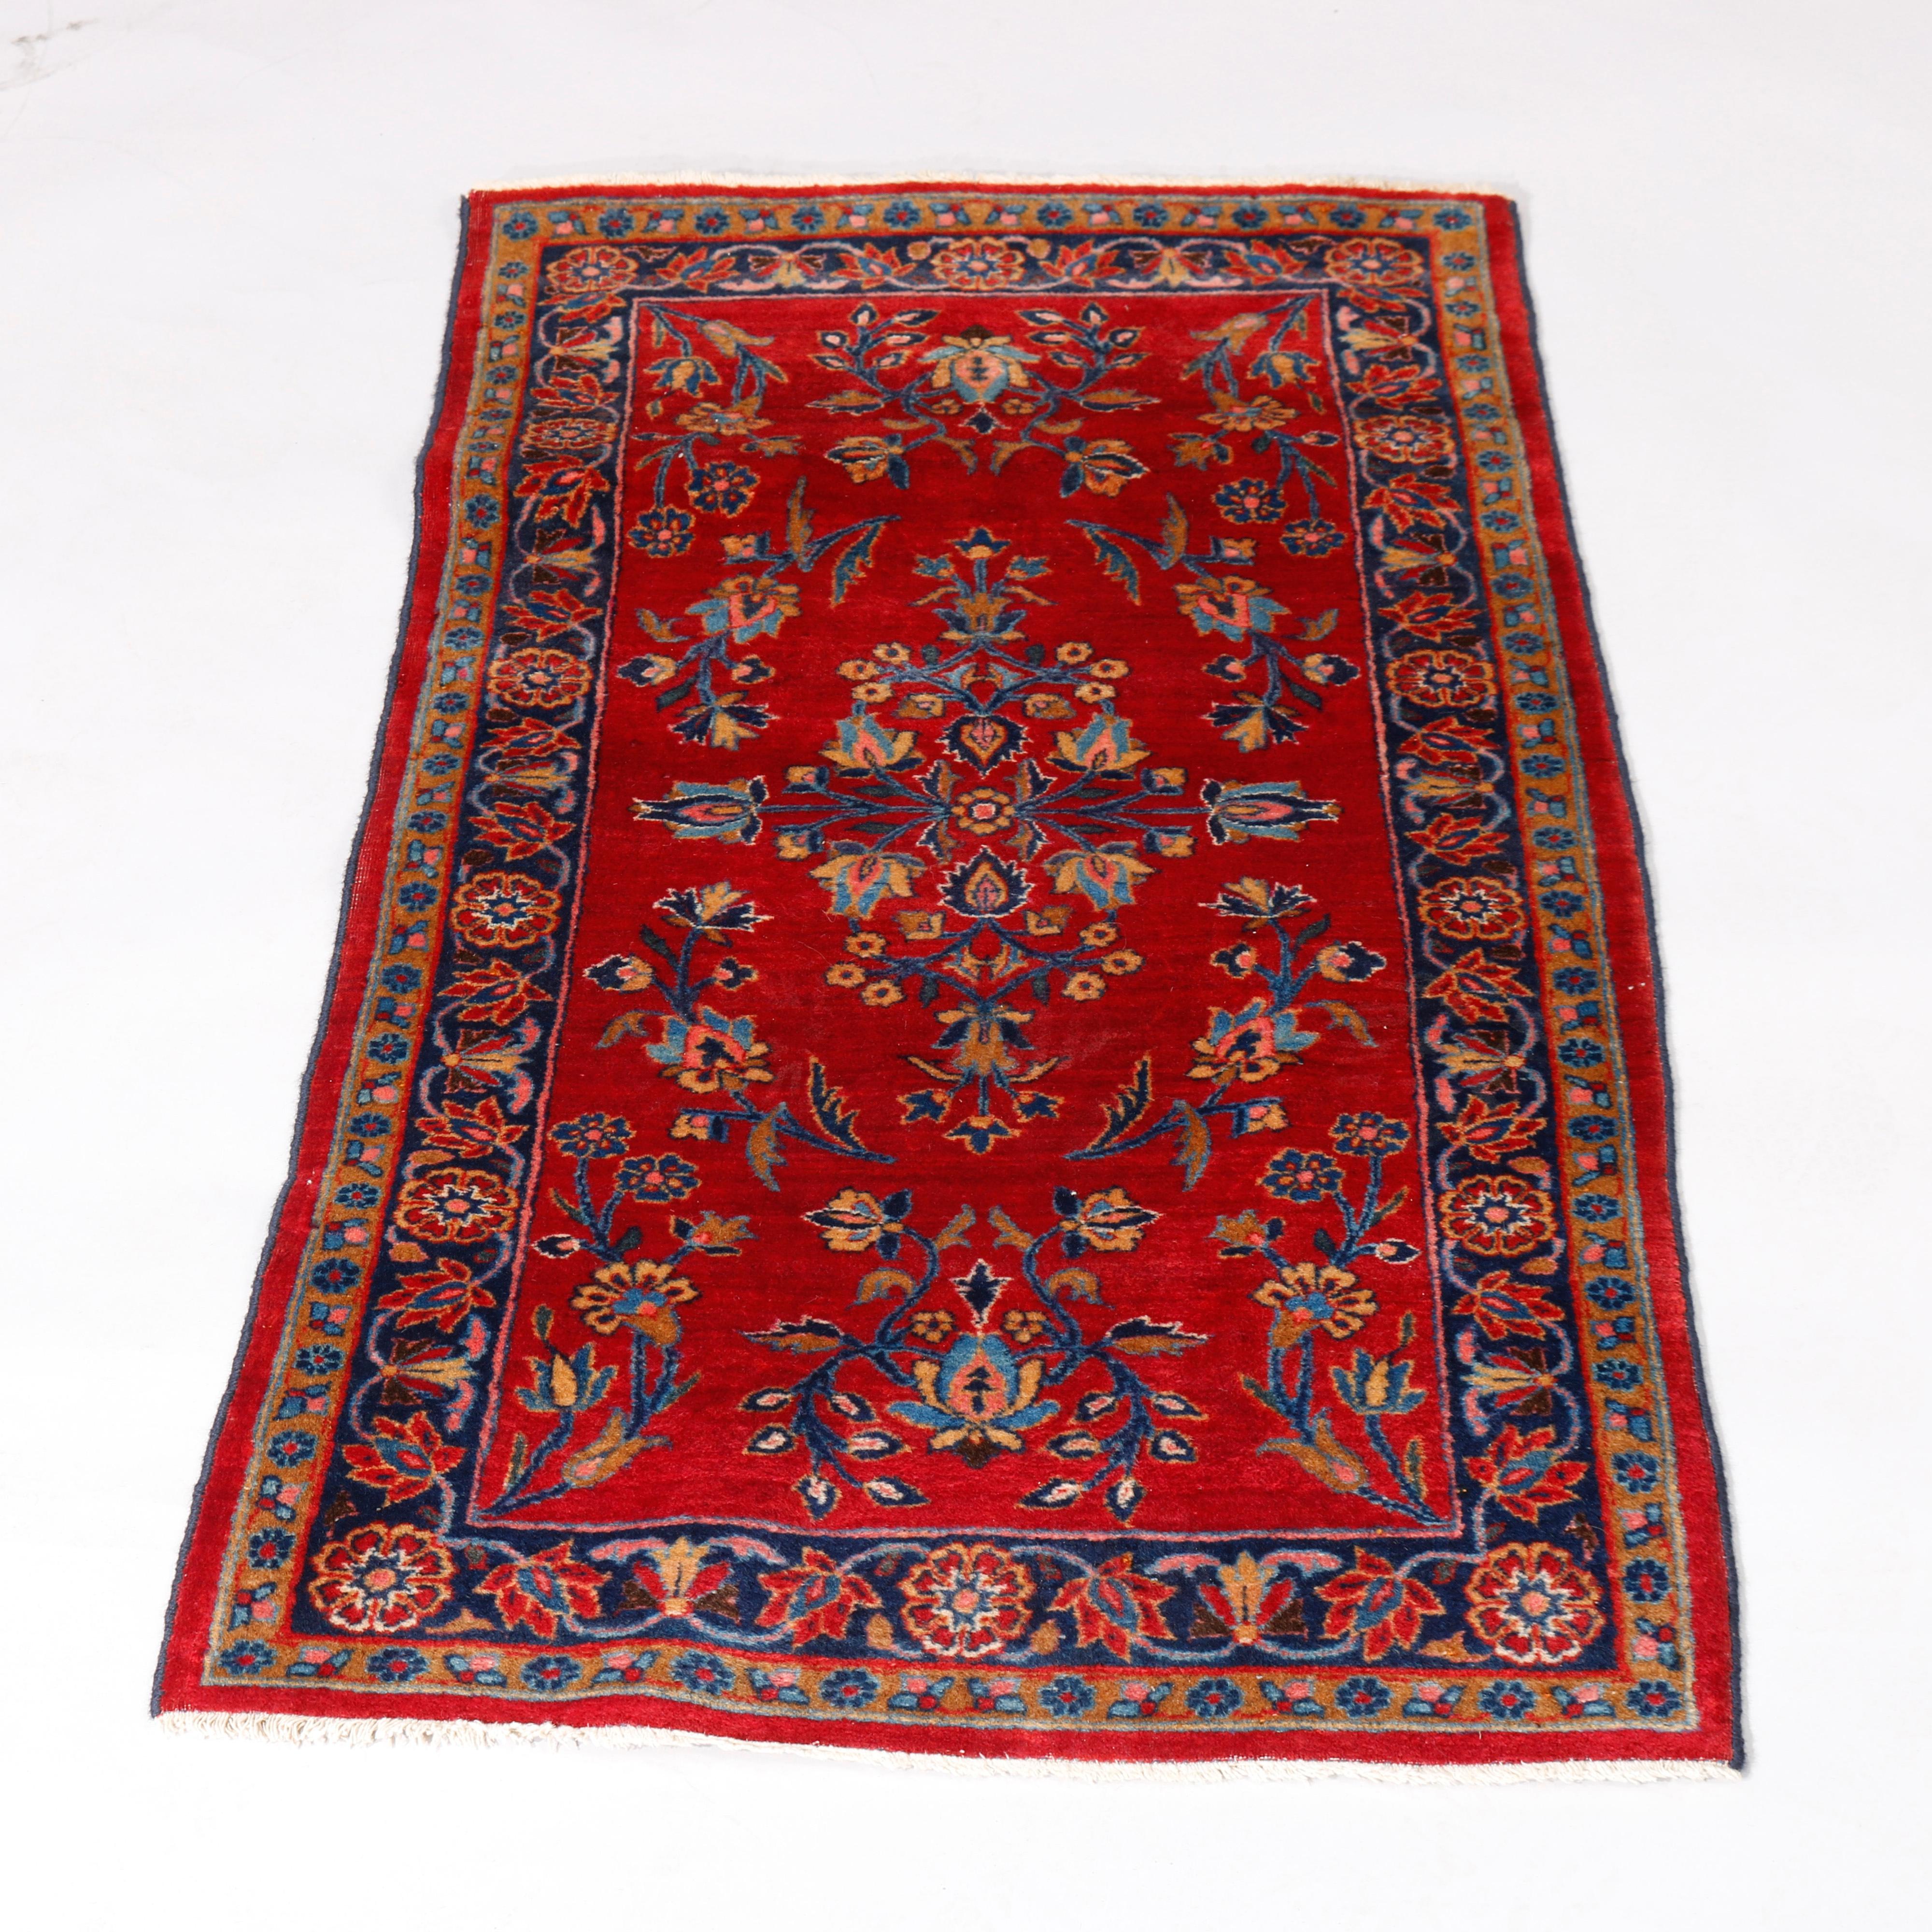 Woven Antique Persian Kashan Oriental Wool Rug, circa 1930 For Sale